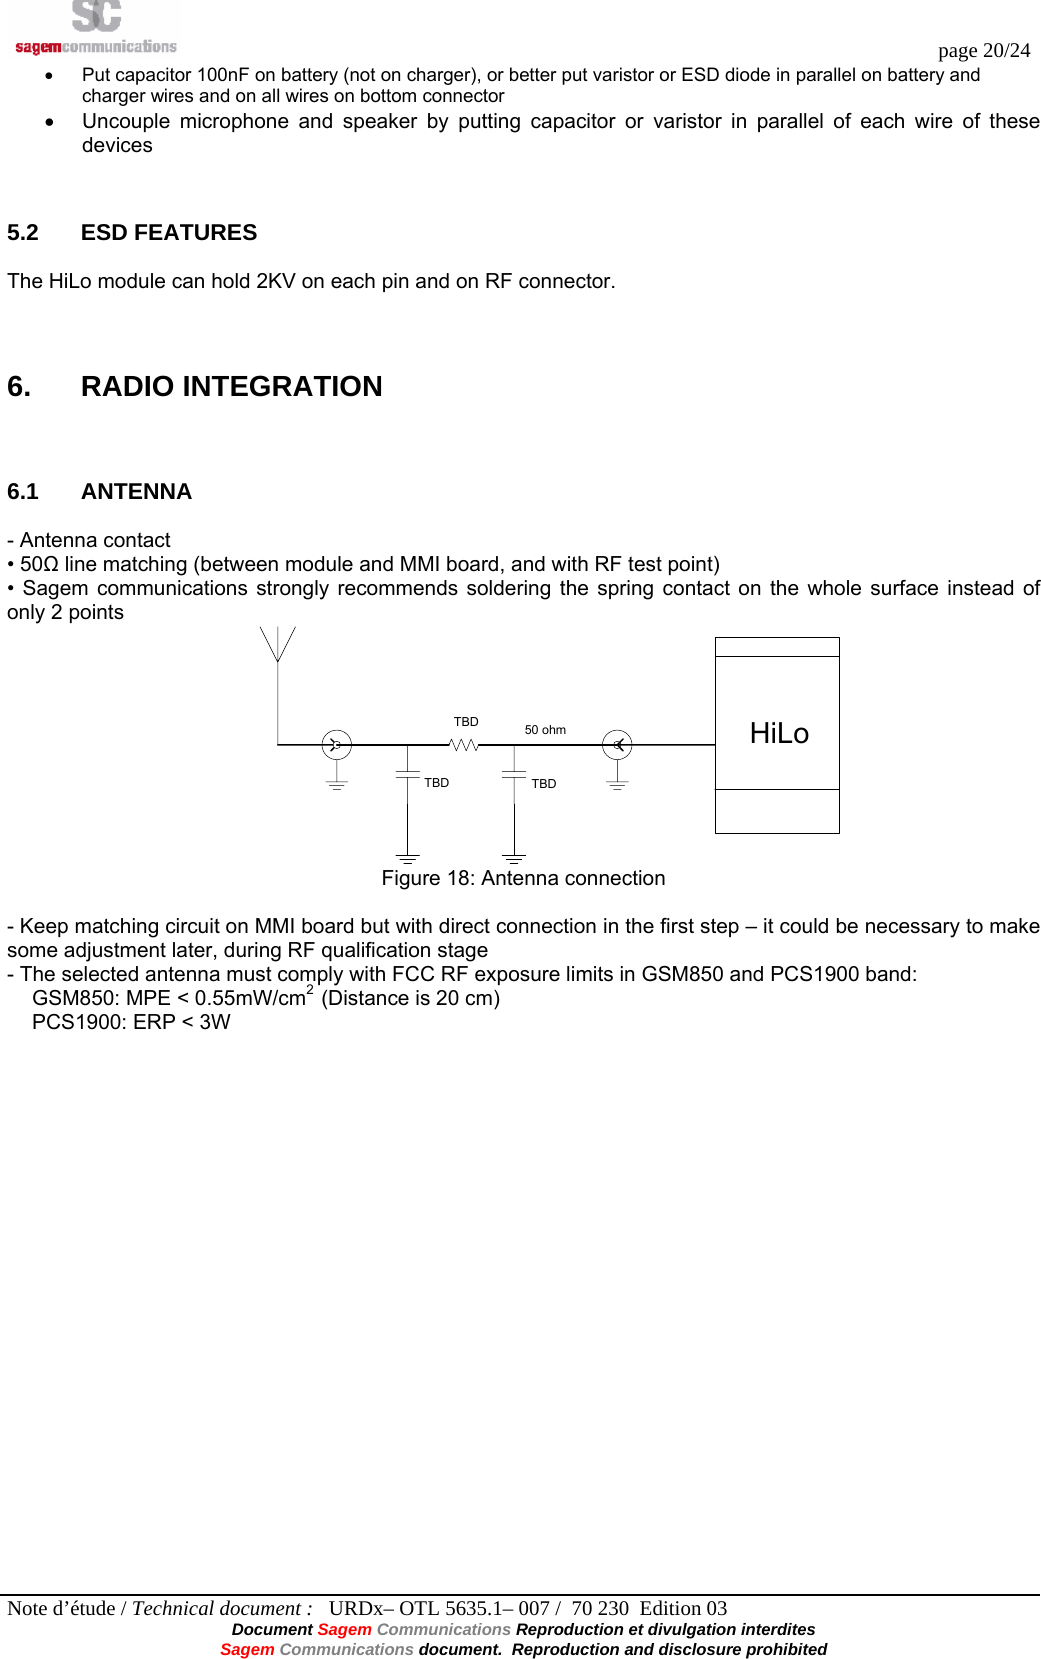  page 20/24 Note d’étude / Technical document :   URDx– OTL 5635.1– 007 /  70 230  Edition 03 Document Sagem Communications Reproduction et divulgation interdites Sagem Communications document.  Reproduction and disclosure prohibited •  Put capacitor 100nF on battery (not on charger), or better put varistor or ESD diode in parallel on battery and charger wires and on all wires on bottom connector •  Uncouple microphone and speaker by putting capacitor or varistor in parallel of each wire of these devices  5.2 ESD FEATURES The HiLo module can hold 2KV on each pin and on RF connector.   6. RADIO INTEGRATION  6.1 ANTENNA - Antenna contact • 50Ω line matching (between module and MMI board, and with RF test point) • Sagem communications strongly recommends soldering the spring contact on the whole surface instead of only 2 points TBDTBD TBDHiLo50 ohm Figure 18: Antenna connection  - Keep matching circuit on MMI board but with direct connection in the first step – it could be necessary to make some adjustment later, during RF qualification stage - The selected antenna must comply with FCC RF exposure limits in GSM850 and PCS1900 band: GSM850: MPE &lt; 0.55mW/cm2  (Distance is 20 cm) PCS1900: ERP &lt; 3W 